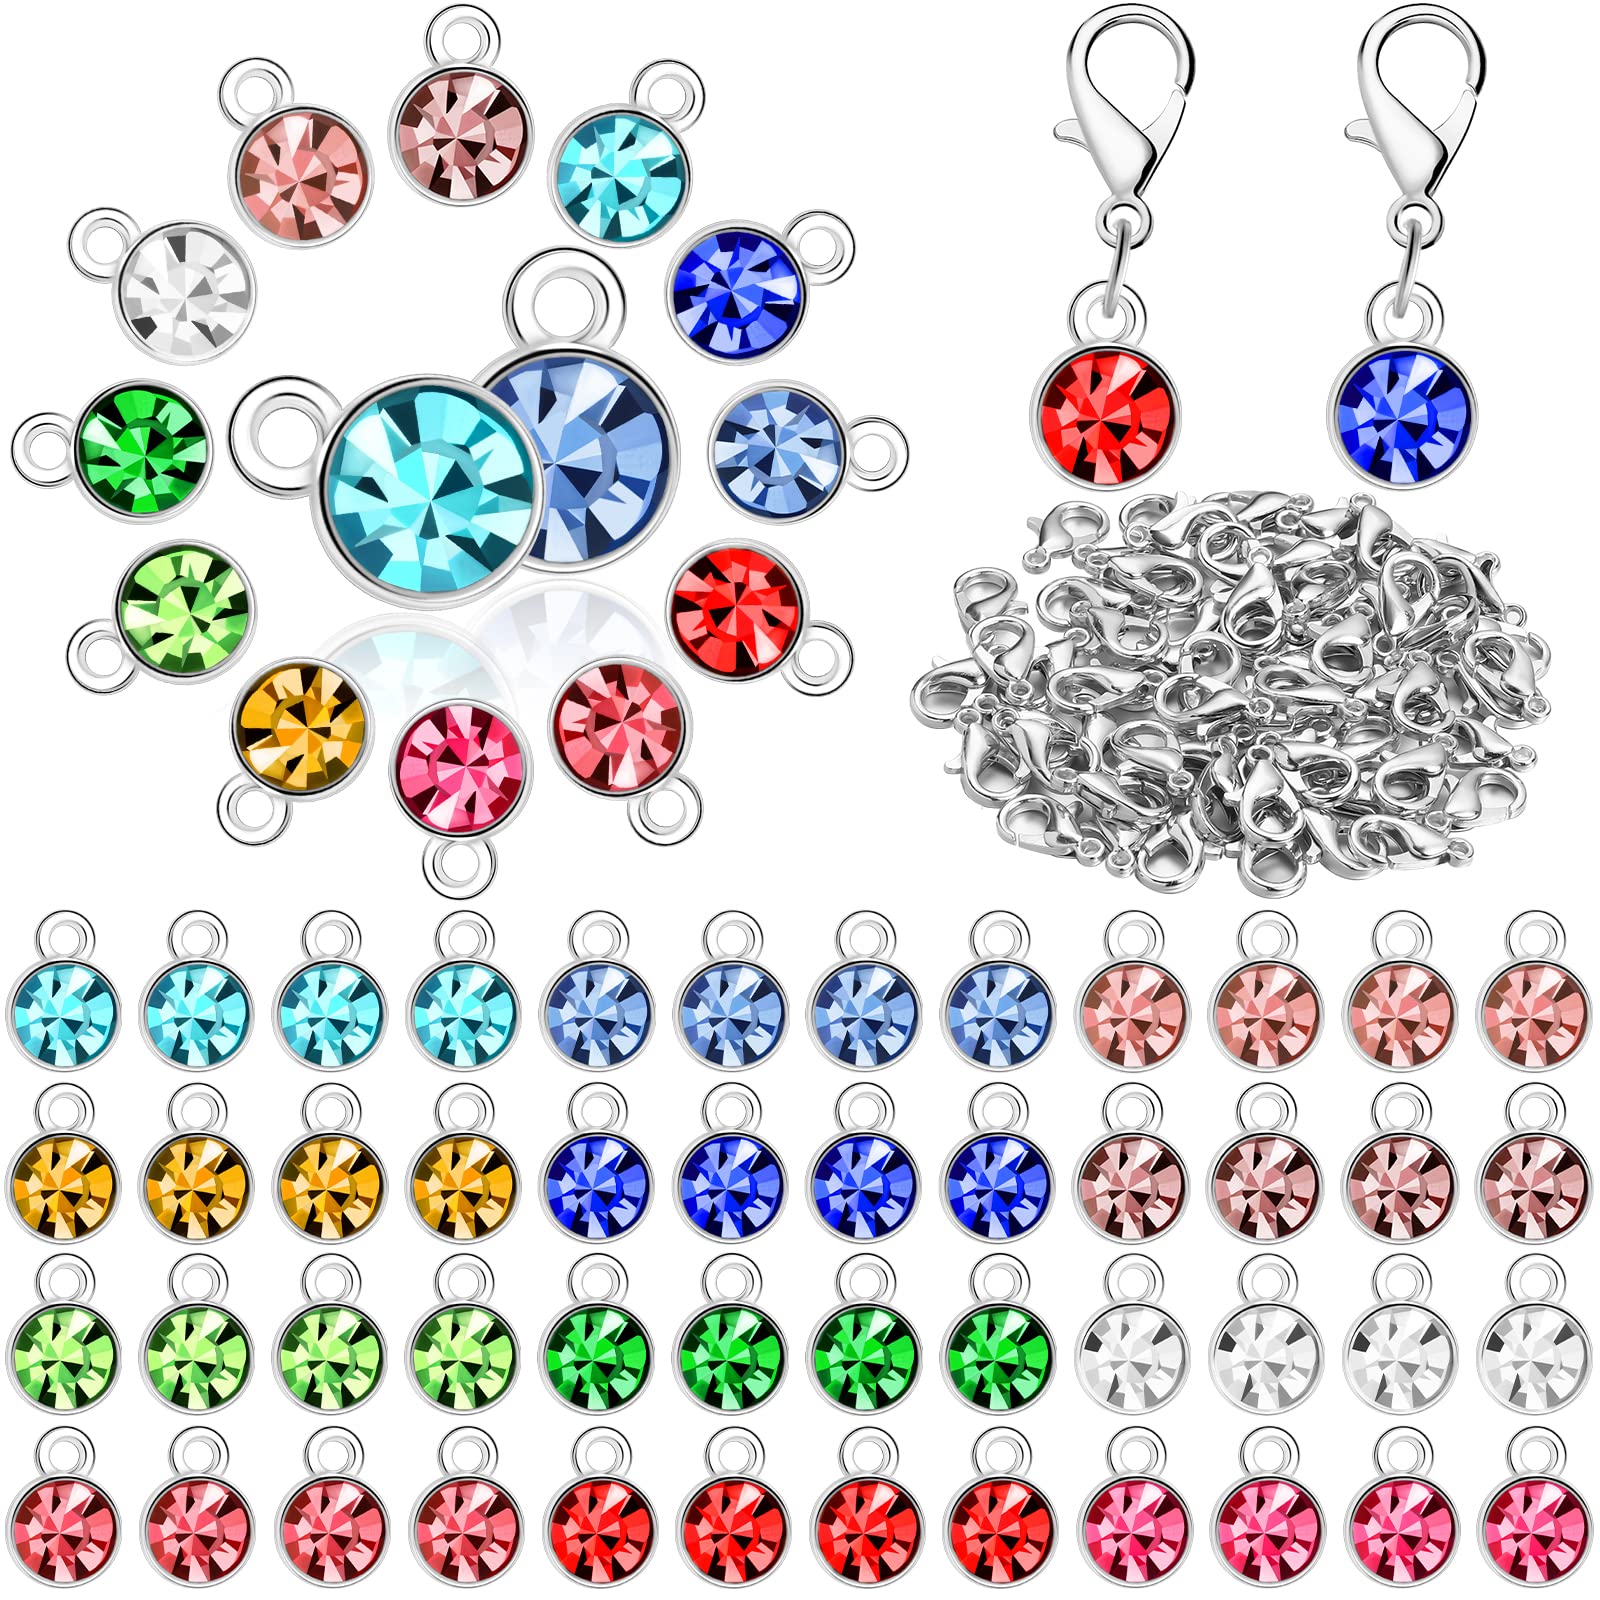 120 Pieces Charms for Jewelry Making Birthstone Charms Earring Charms  Flower Charms Silver Charms Bling Charms